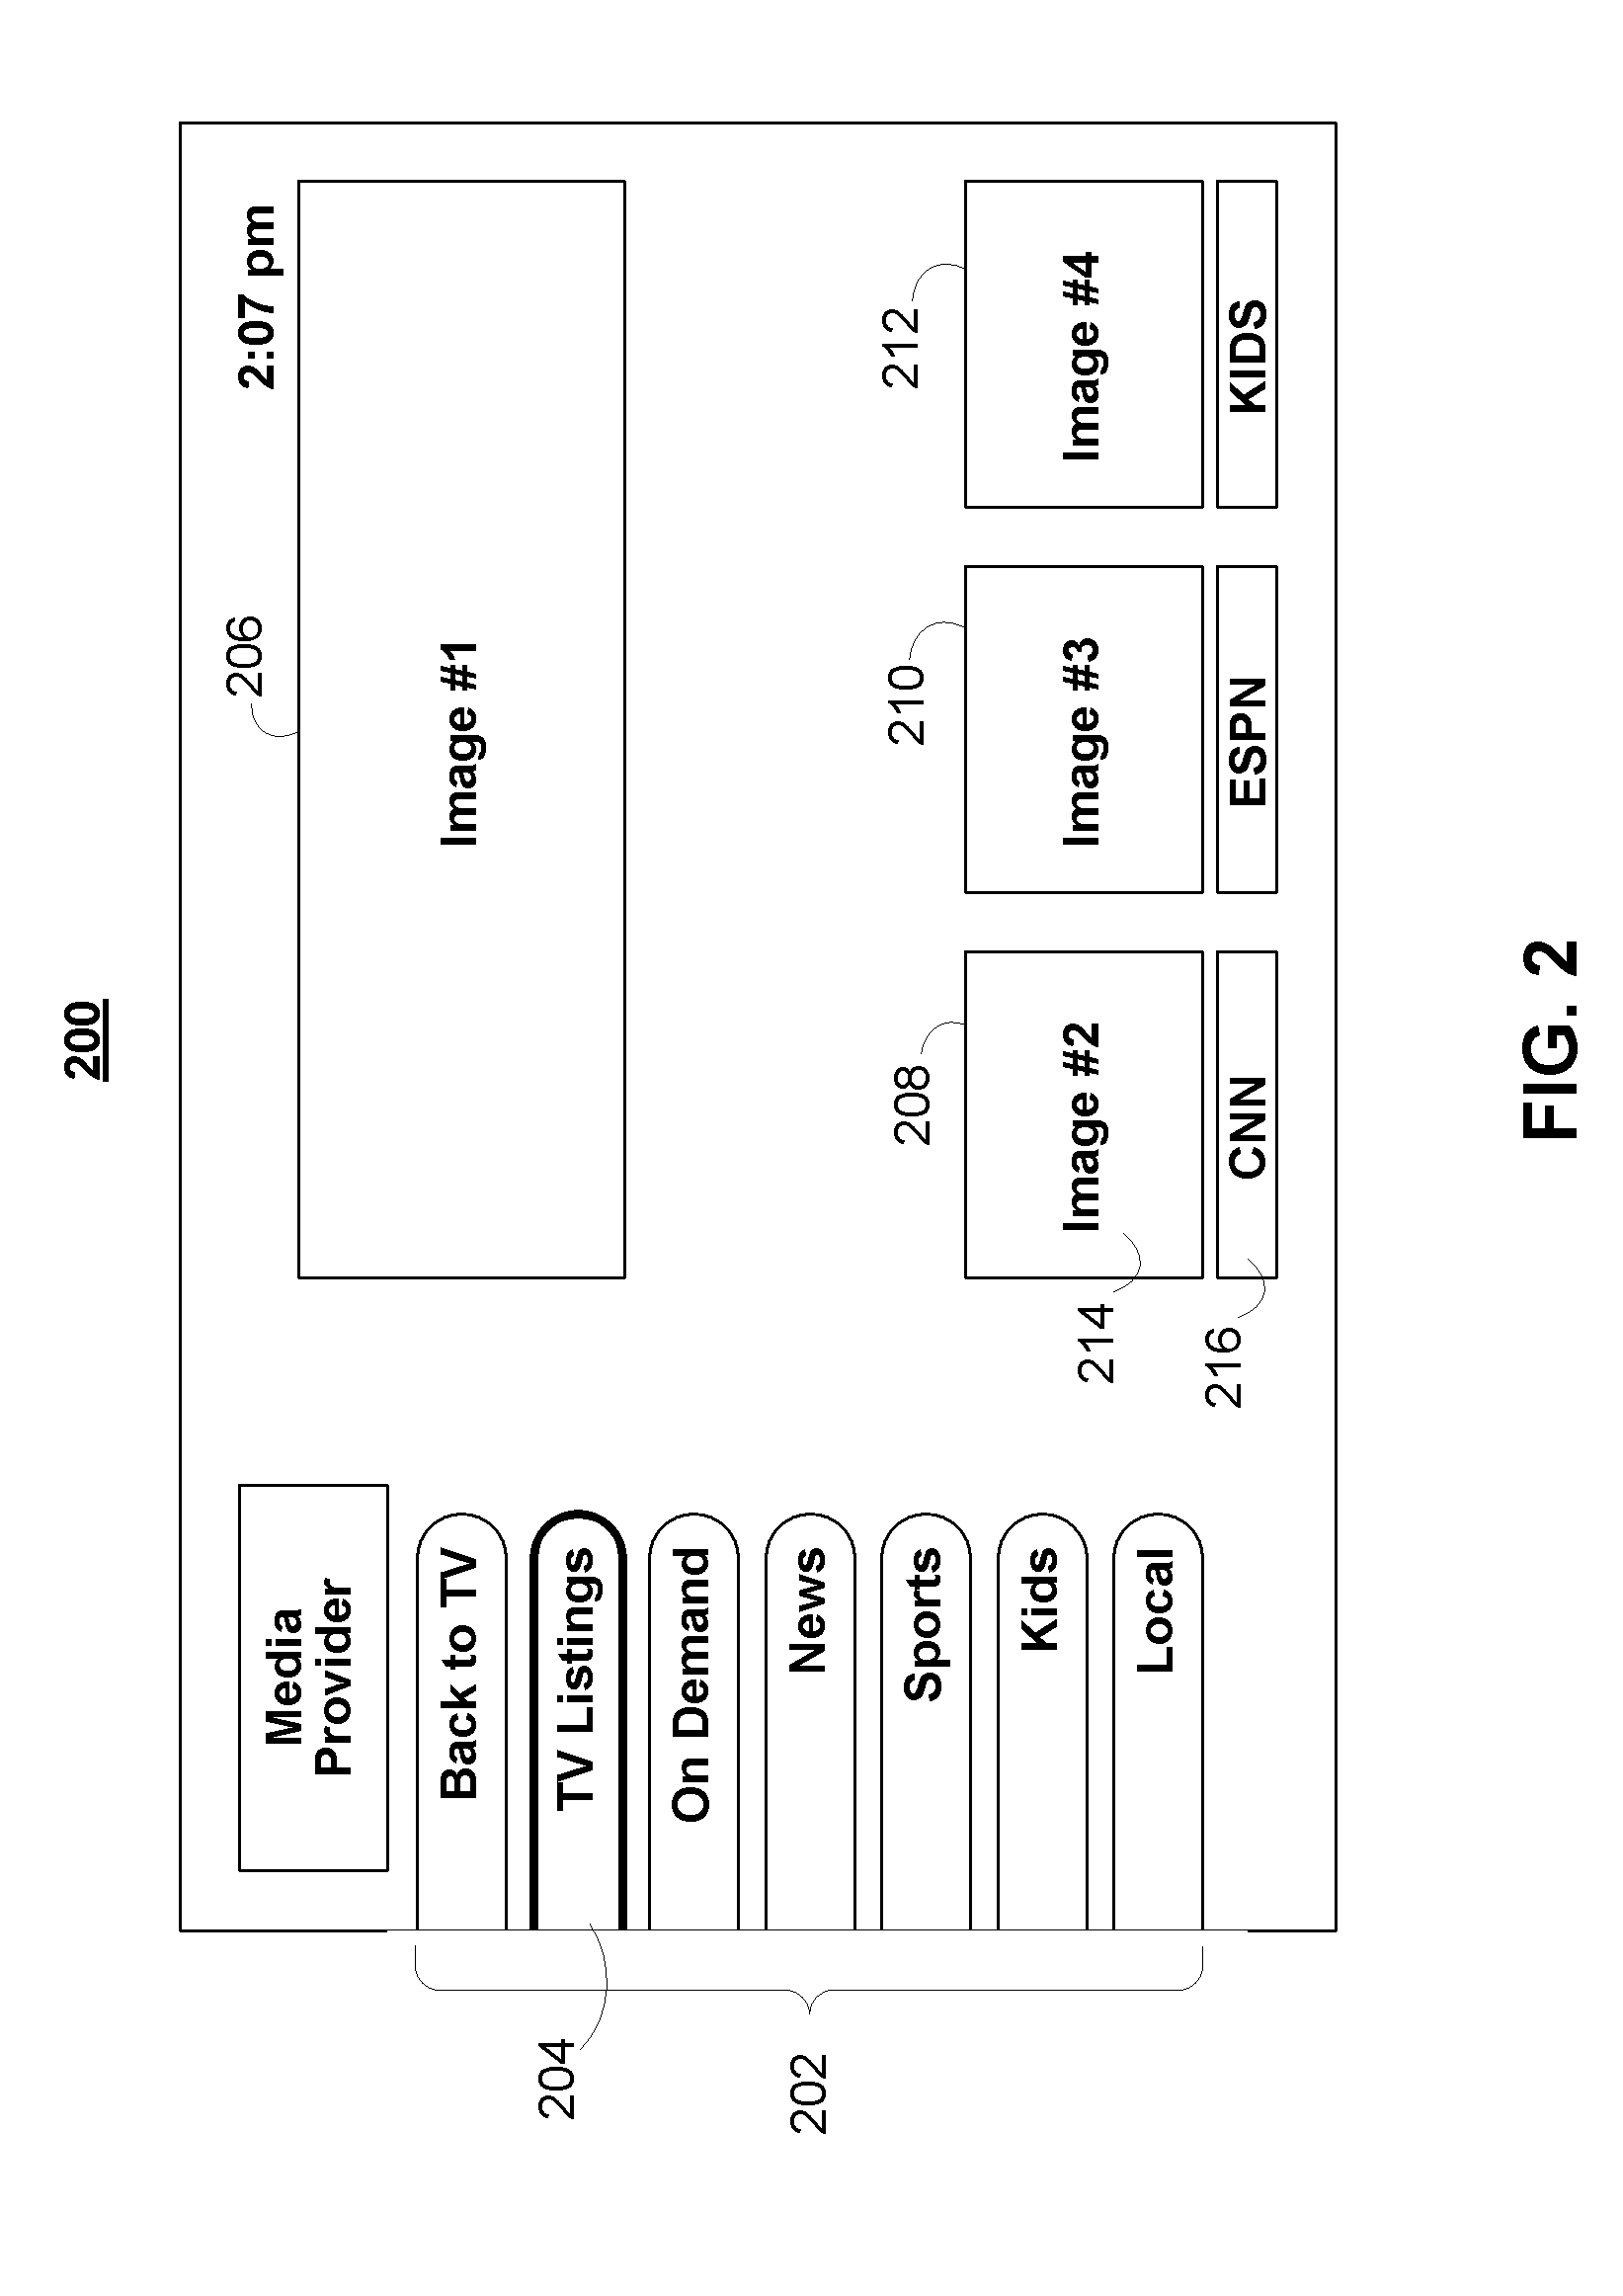 Systems and methods for providing interactive content with a media asset on a media equipment device